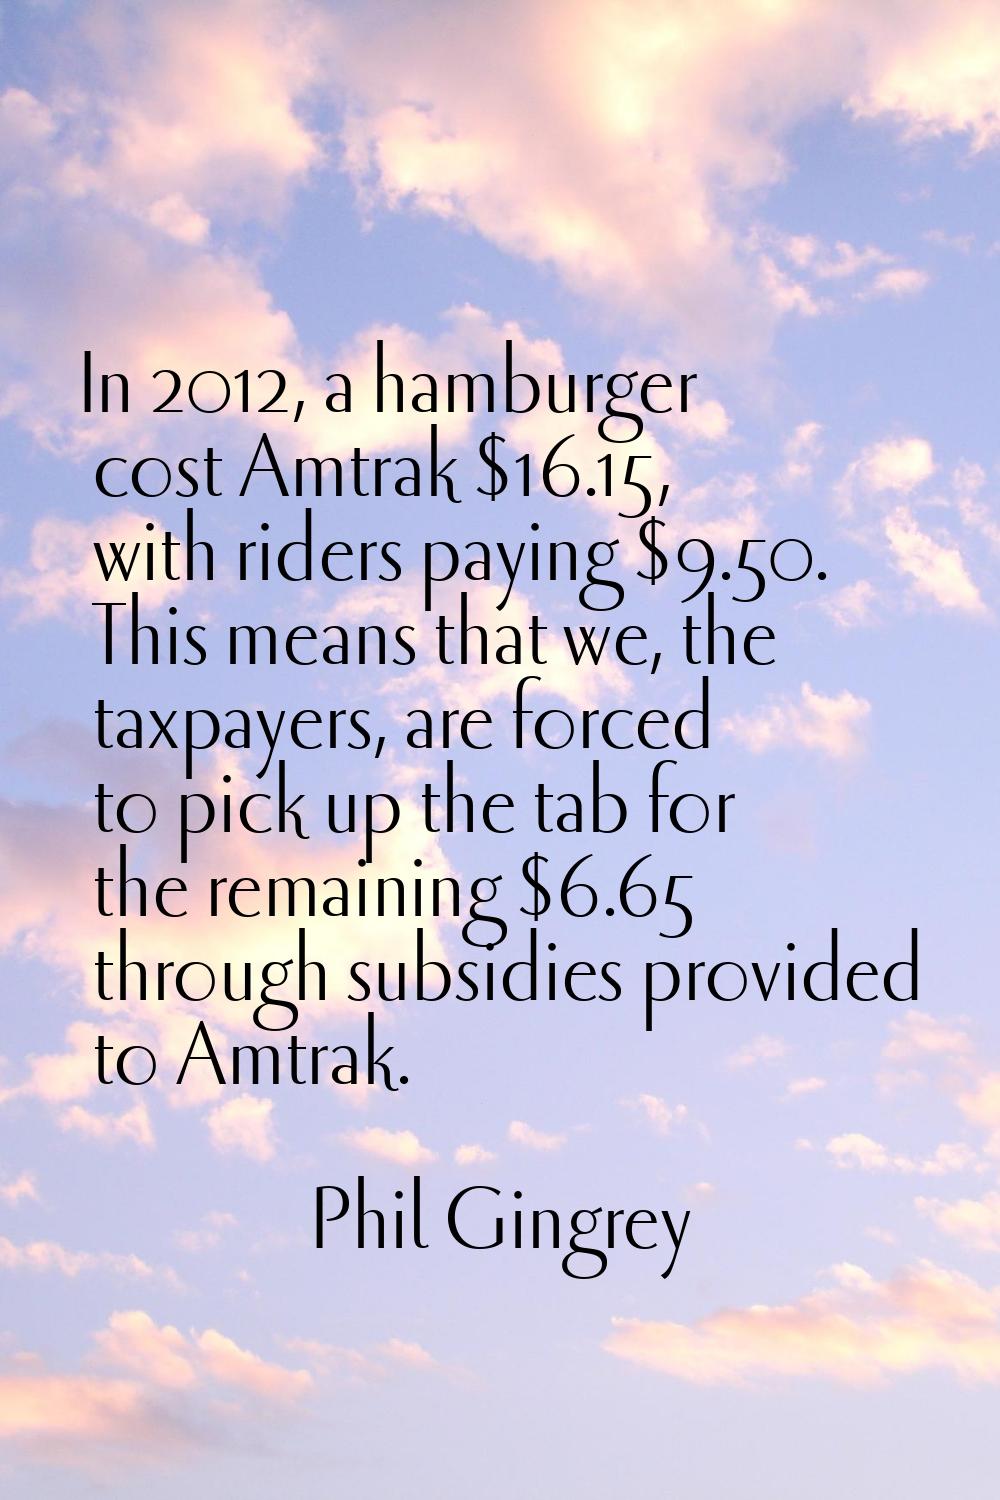 In 2012, a hamburger cost Amtrak $16.15, with riders paying $9.50. This means that we, the taxpayer